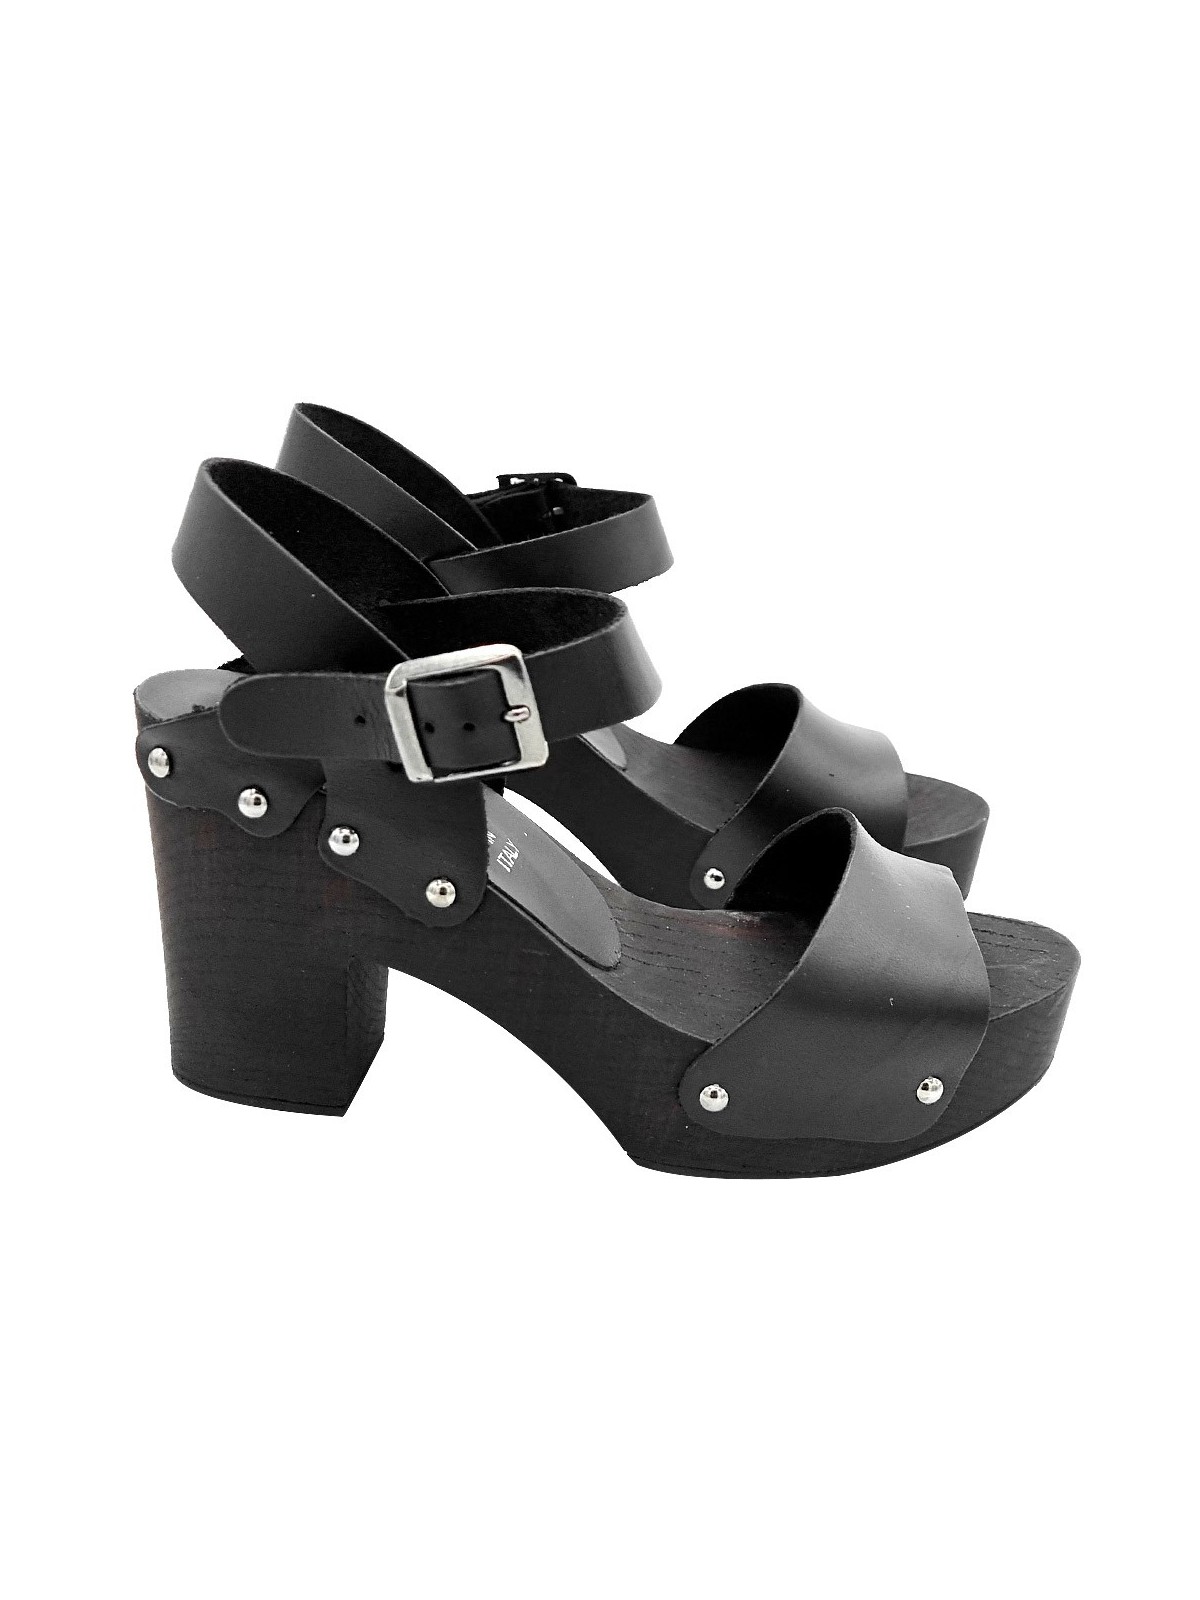 BLACK SANDALS WITH STRAP AND HEEL 9